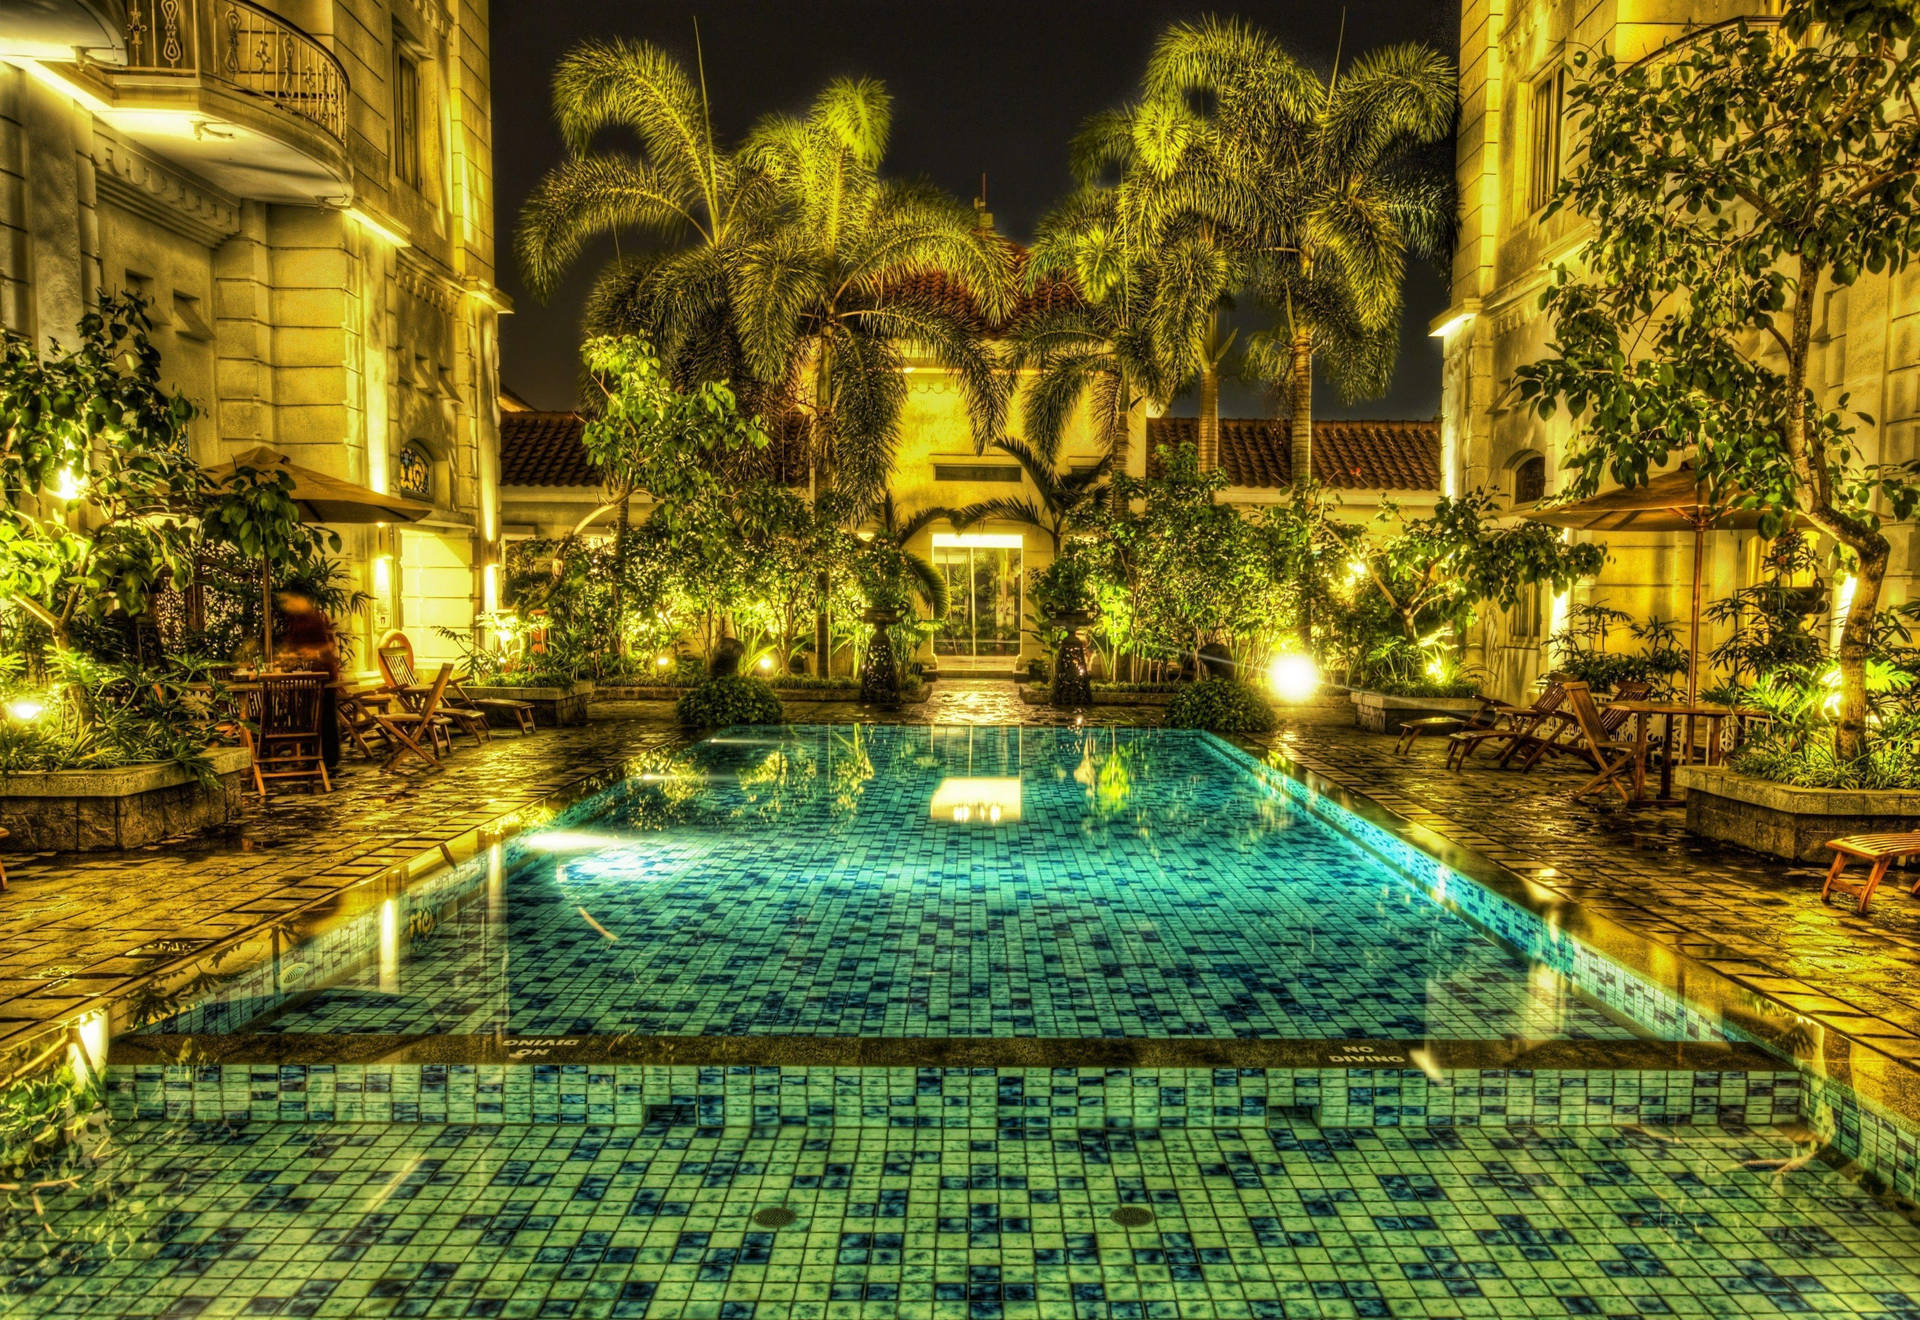 Stunning View Of The Grand Pool In Jakarta, Indonesia.